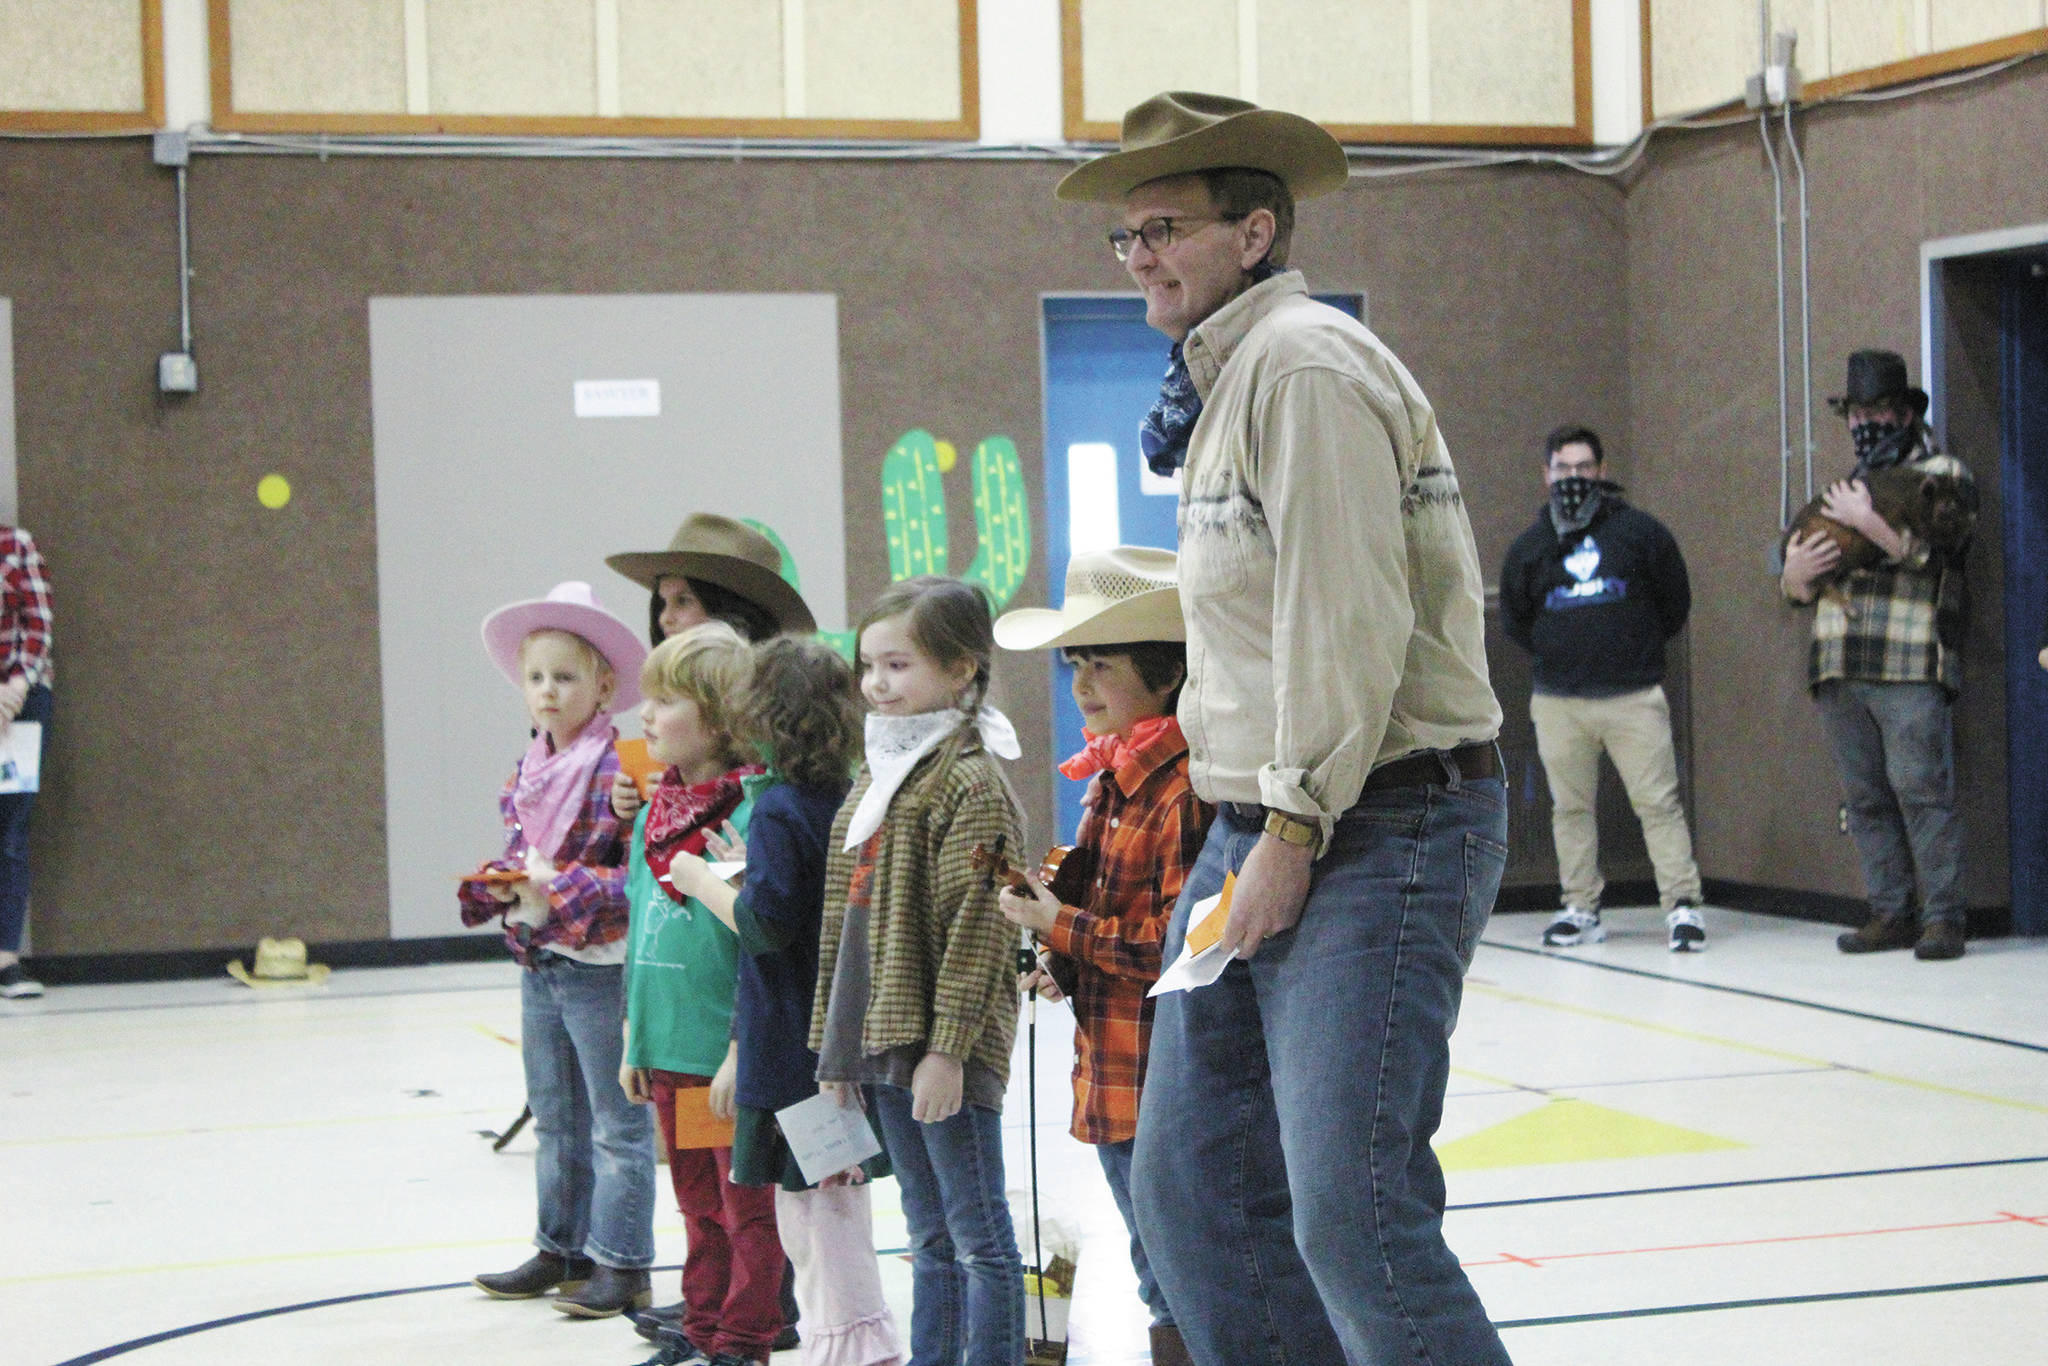 Paul Banks Elementary School Principal Eric Pedersen celebrates with the students who read the most minutes and raised the most money during the school’s annual read-a-thon, at a Thursday, March 5, 2020 assembly at the school in Homer, Alaska. (Photo by Megan Pacer/Homer News)